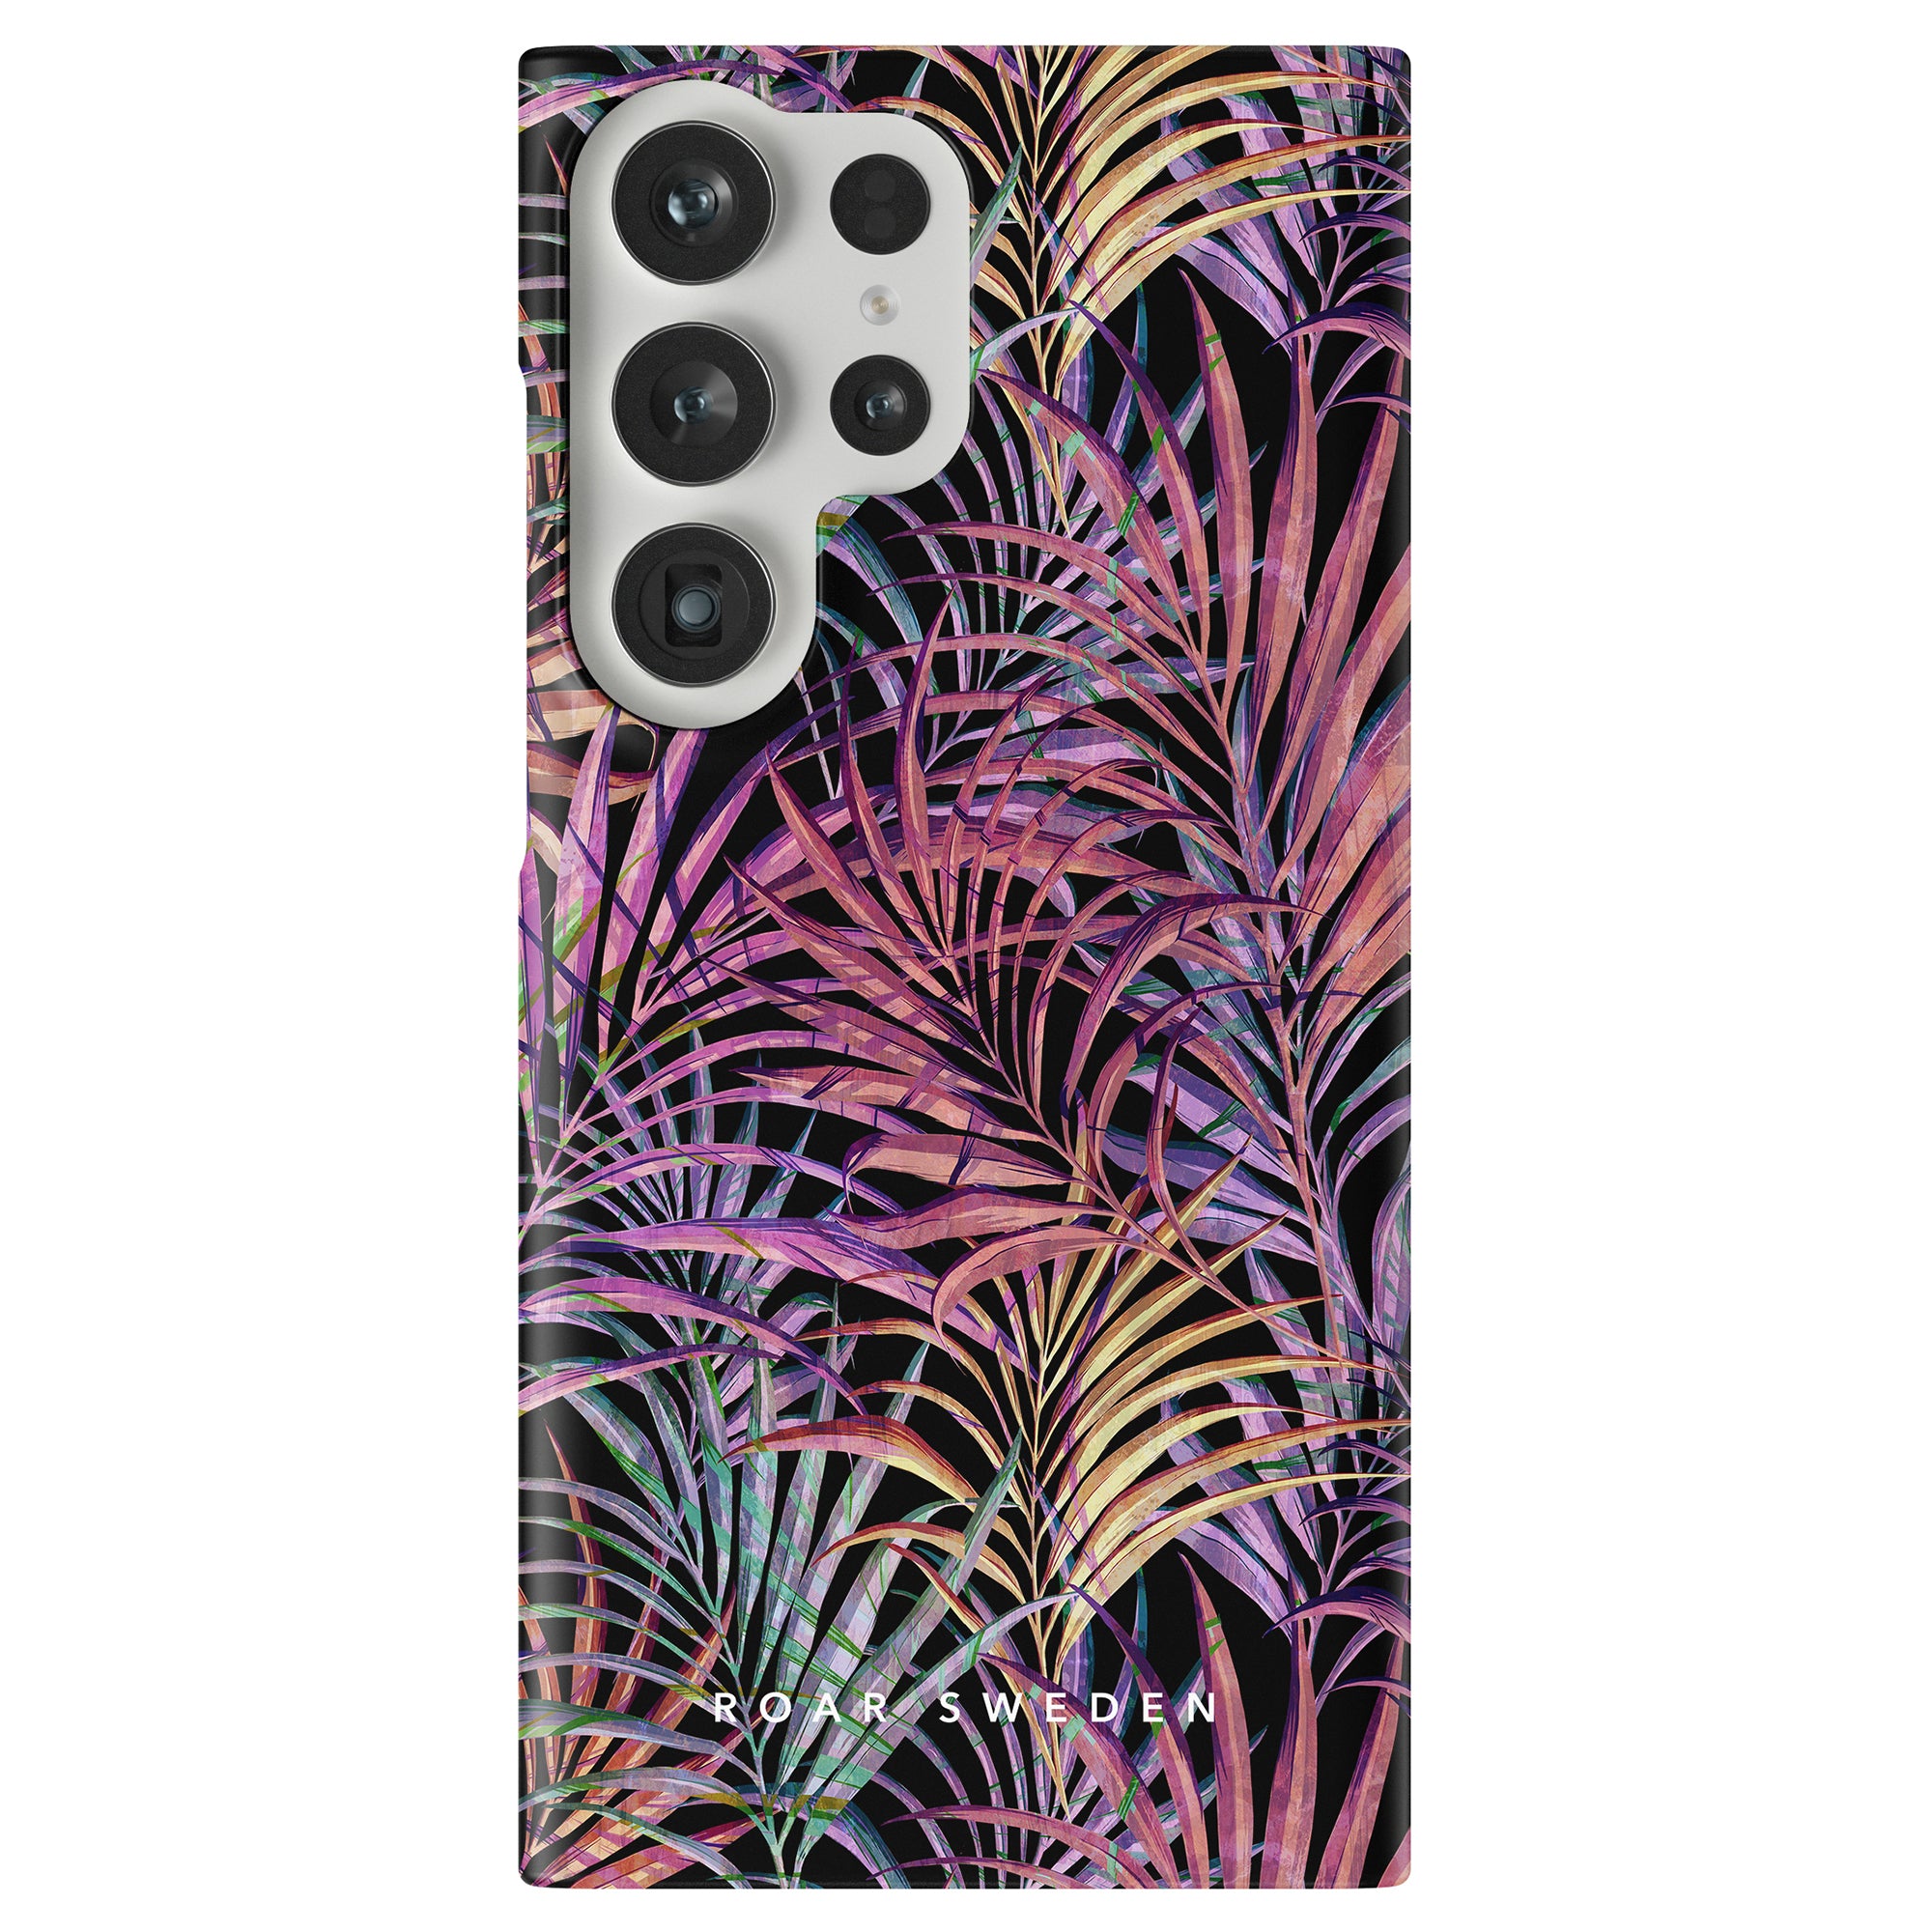 A smartphone with a Summer Palms - Slim case featuring a triple-camera setup and an organic deodorant.